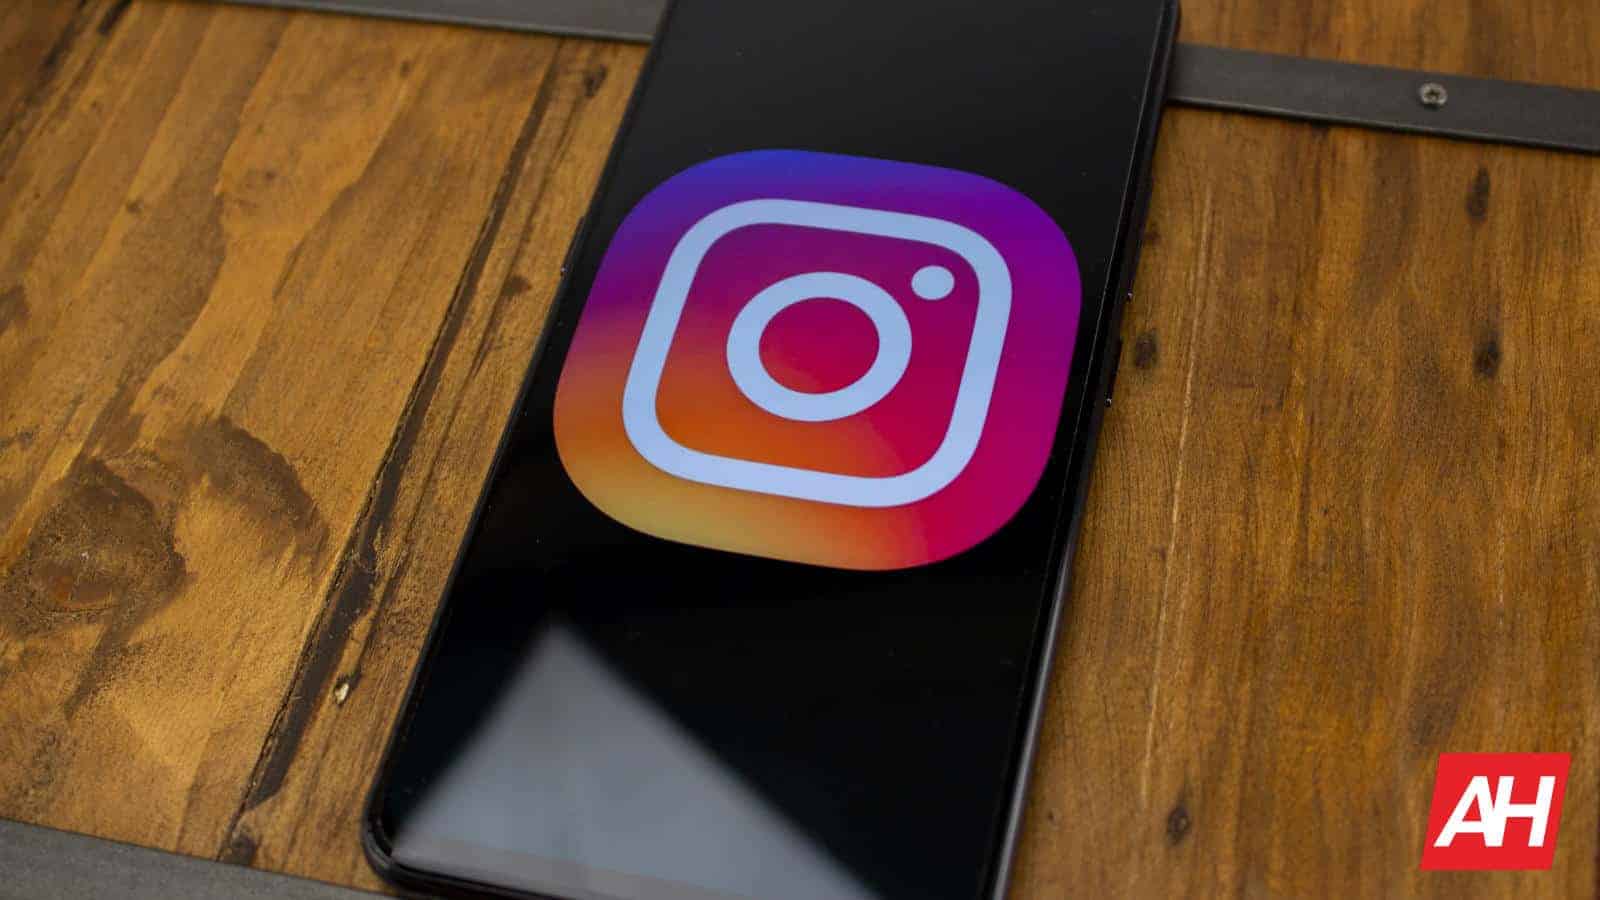 Instagram is testing unskippable ads